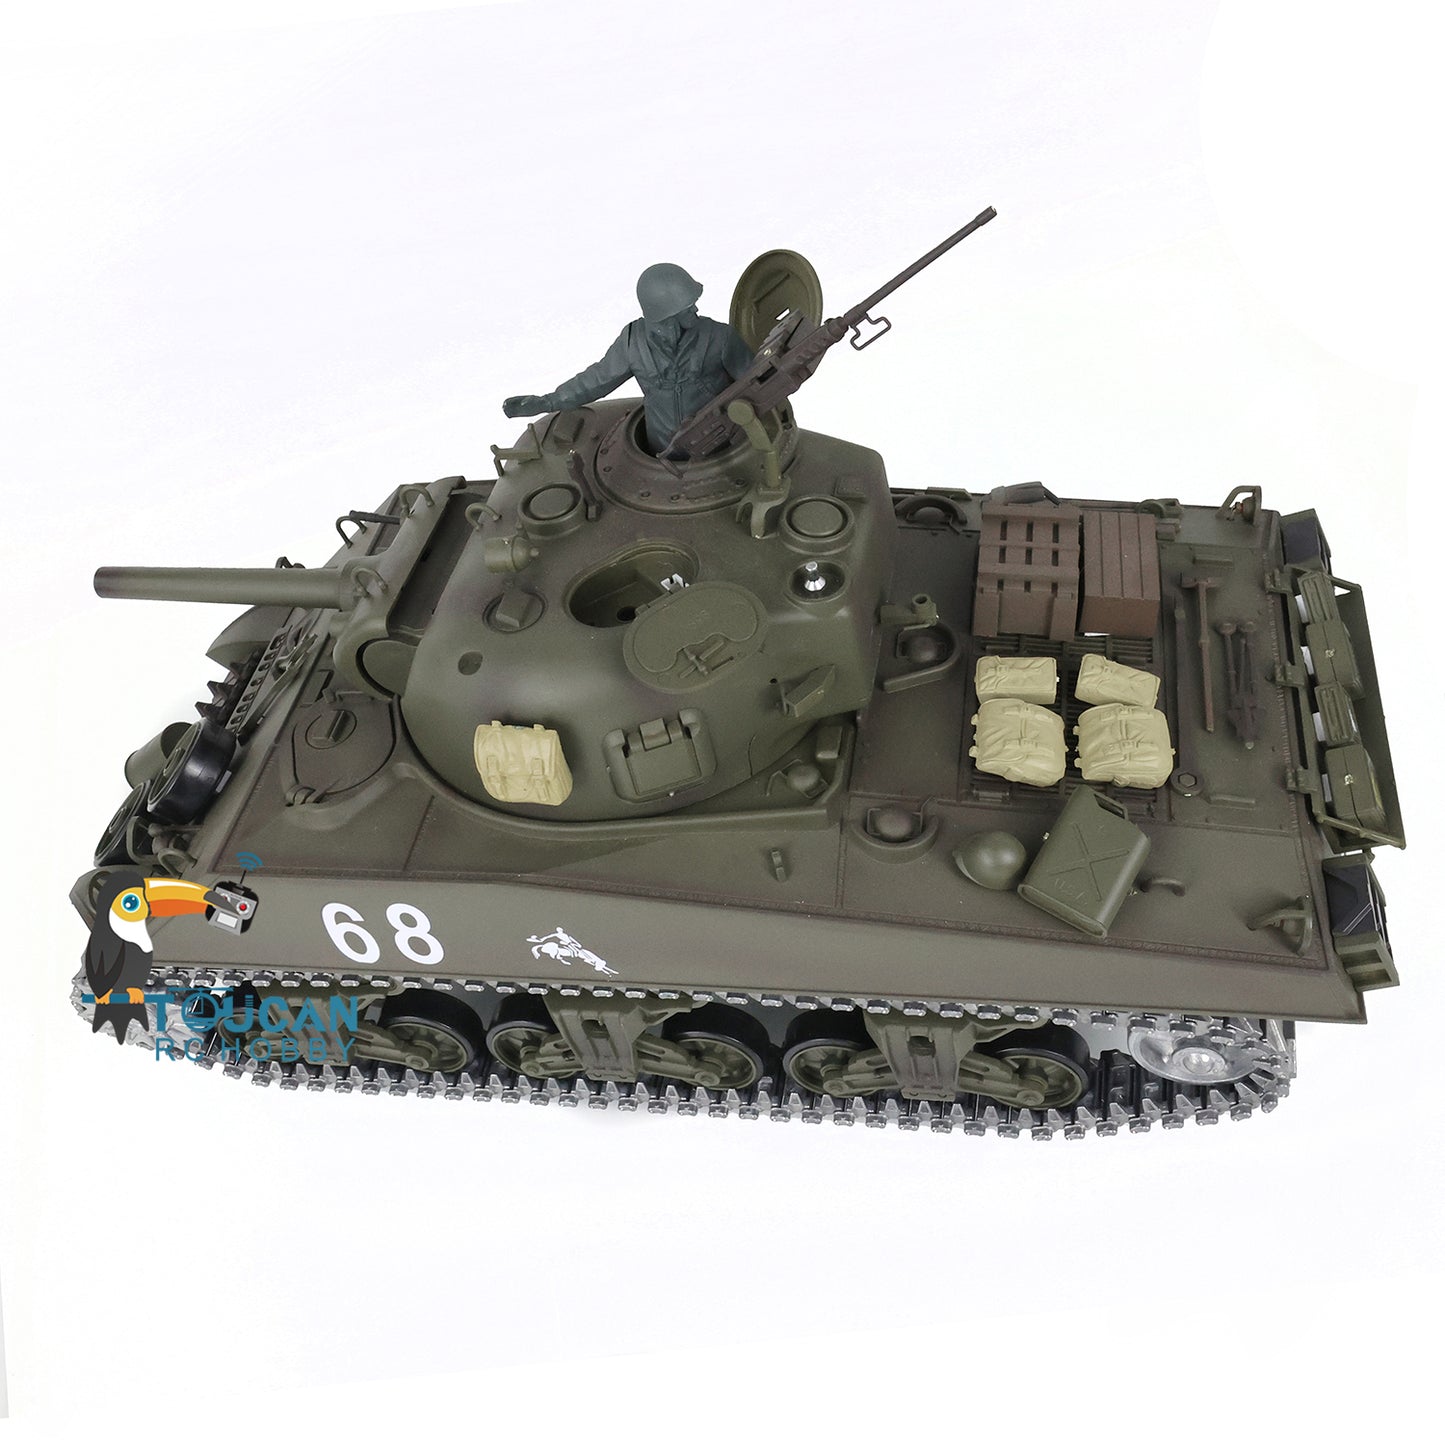 2.4G Henglong 1/16 Scale 7.0 Upgraded M4A3 Sherman RTR Radio Control Tank Model 3898 Metal Tracks Engine Sound BB Shooting Gearbox